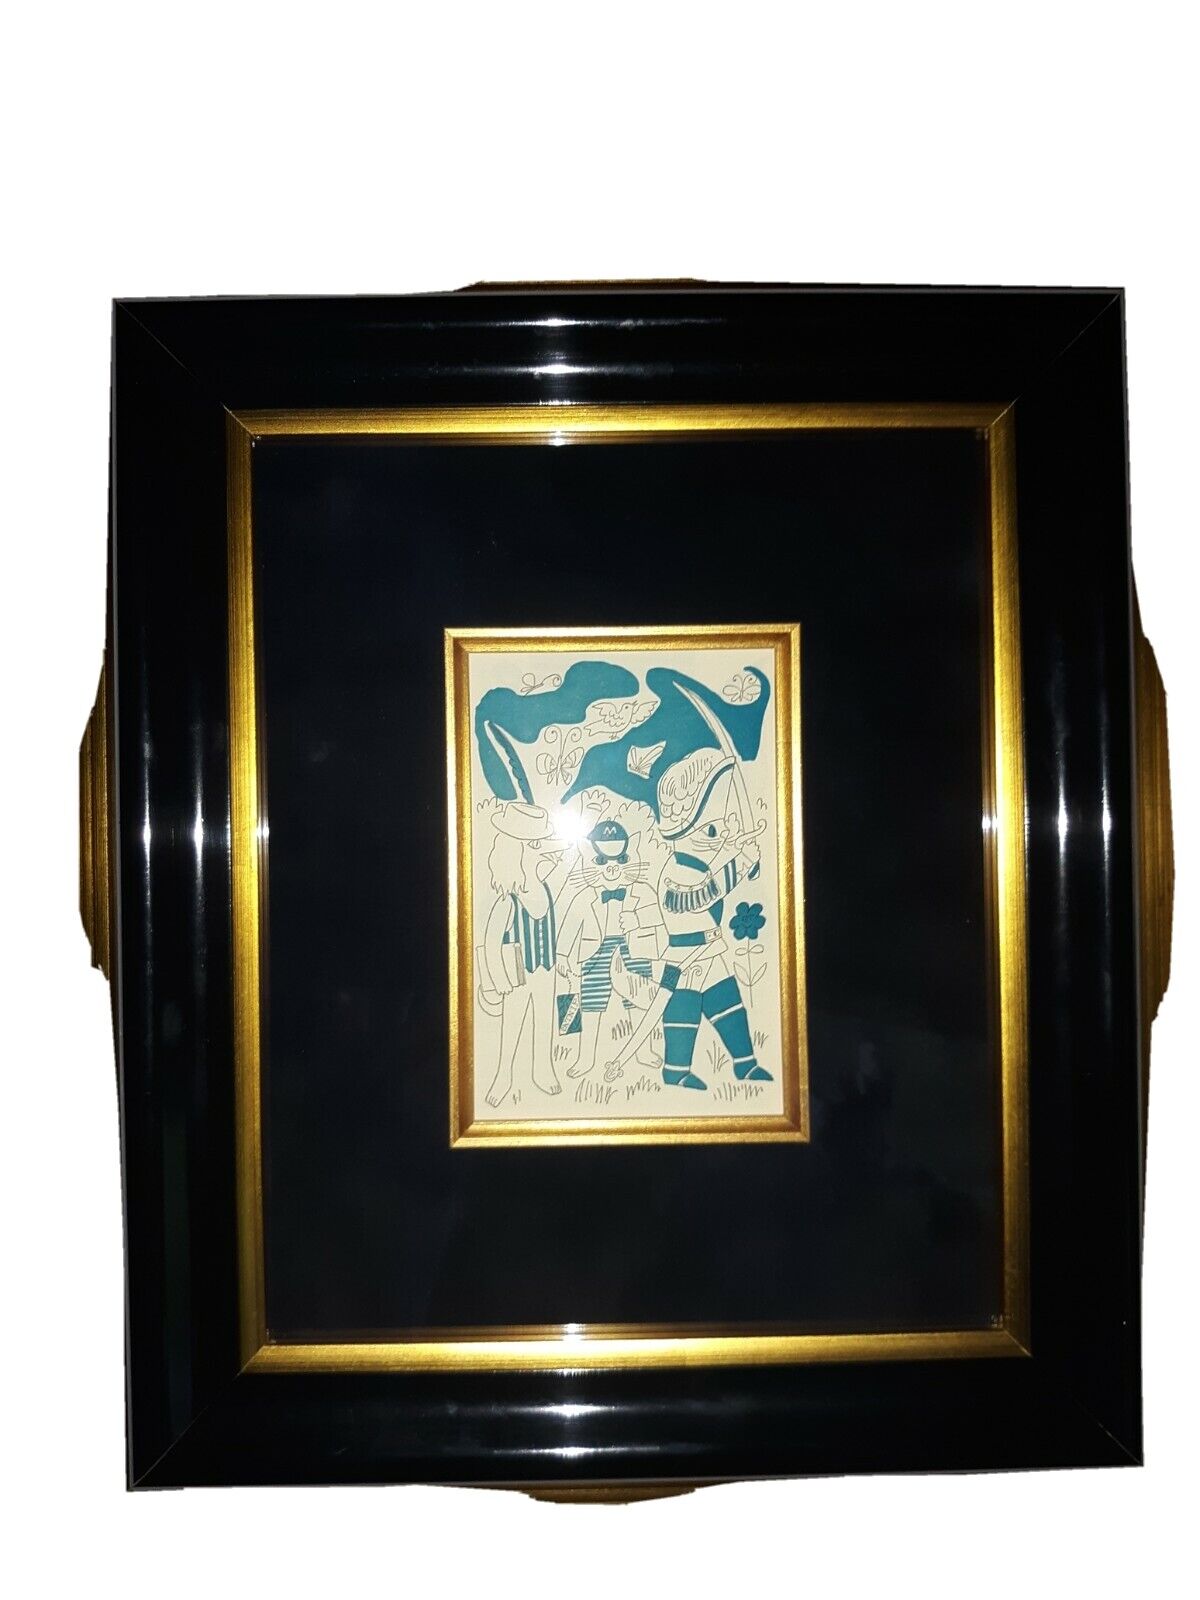 1959 ANDY WARHOL SCARCE LITHO Museum Quality Gold Framed 